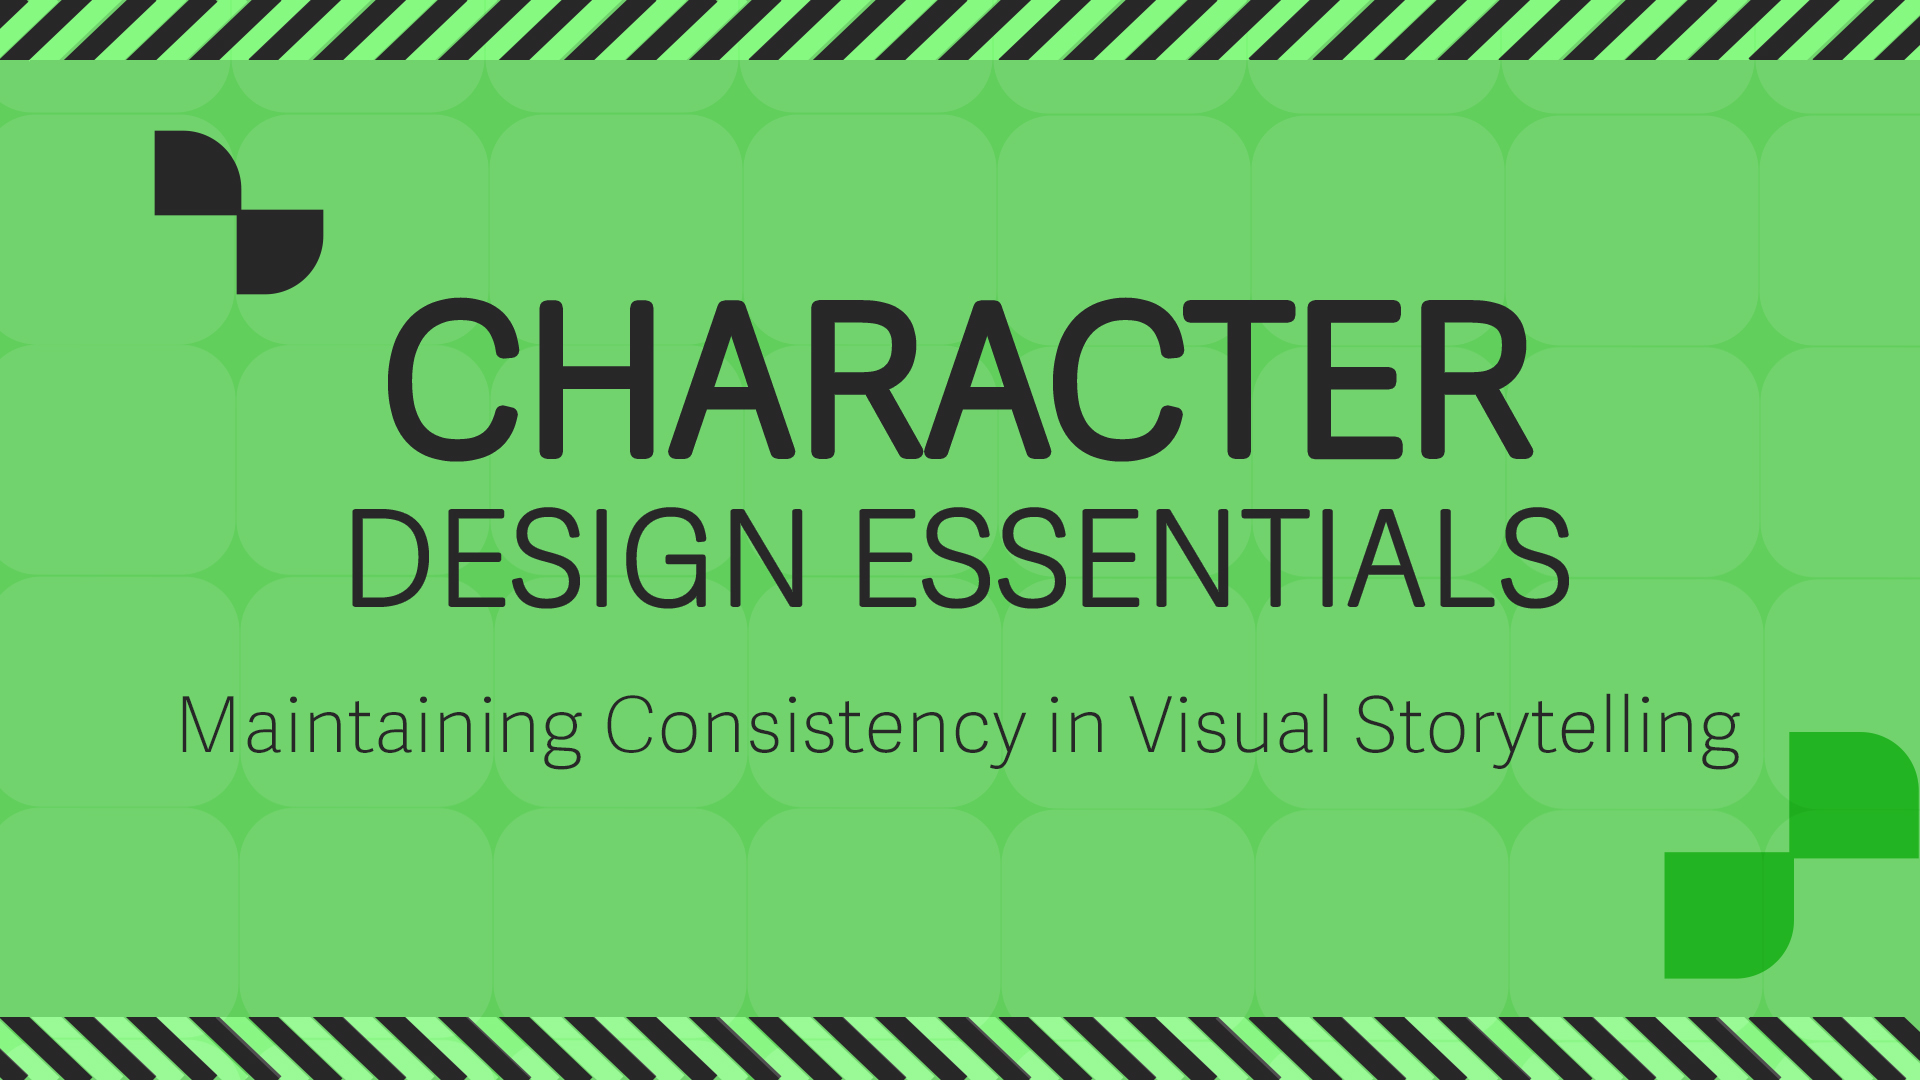 Character Design Essentials: Maintaining Consistency in Visual Storytelling